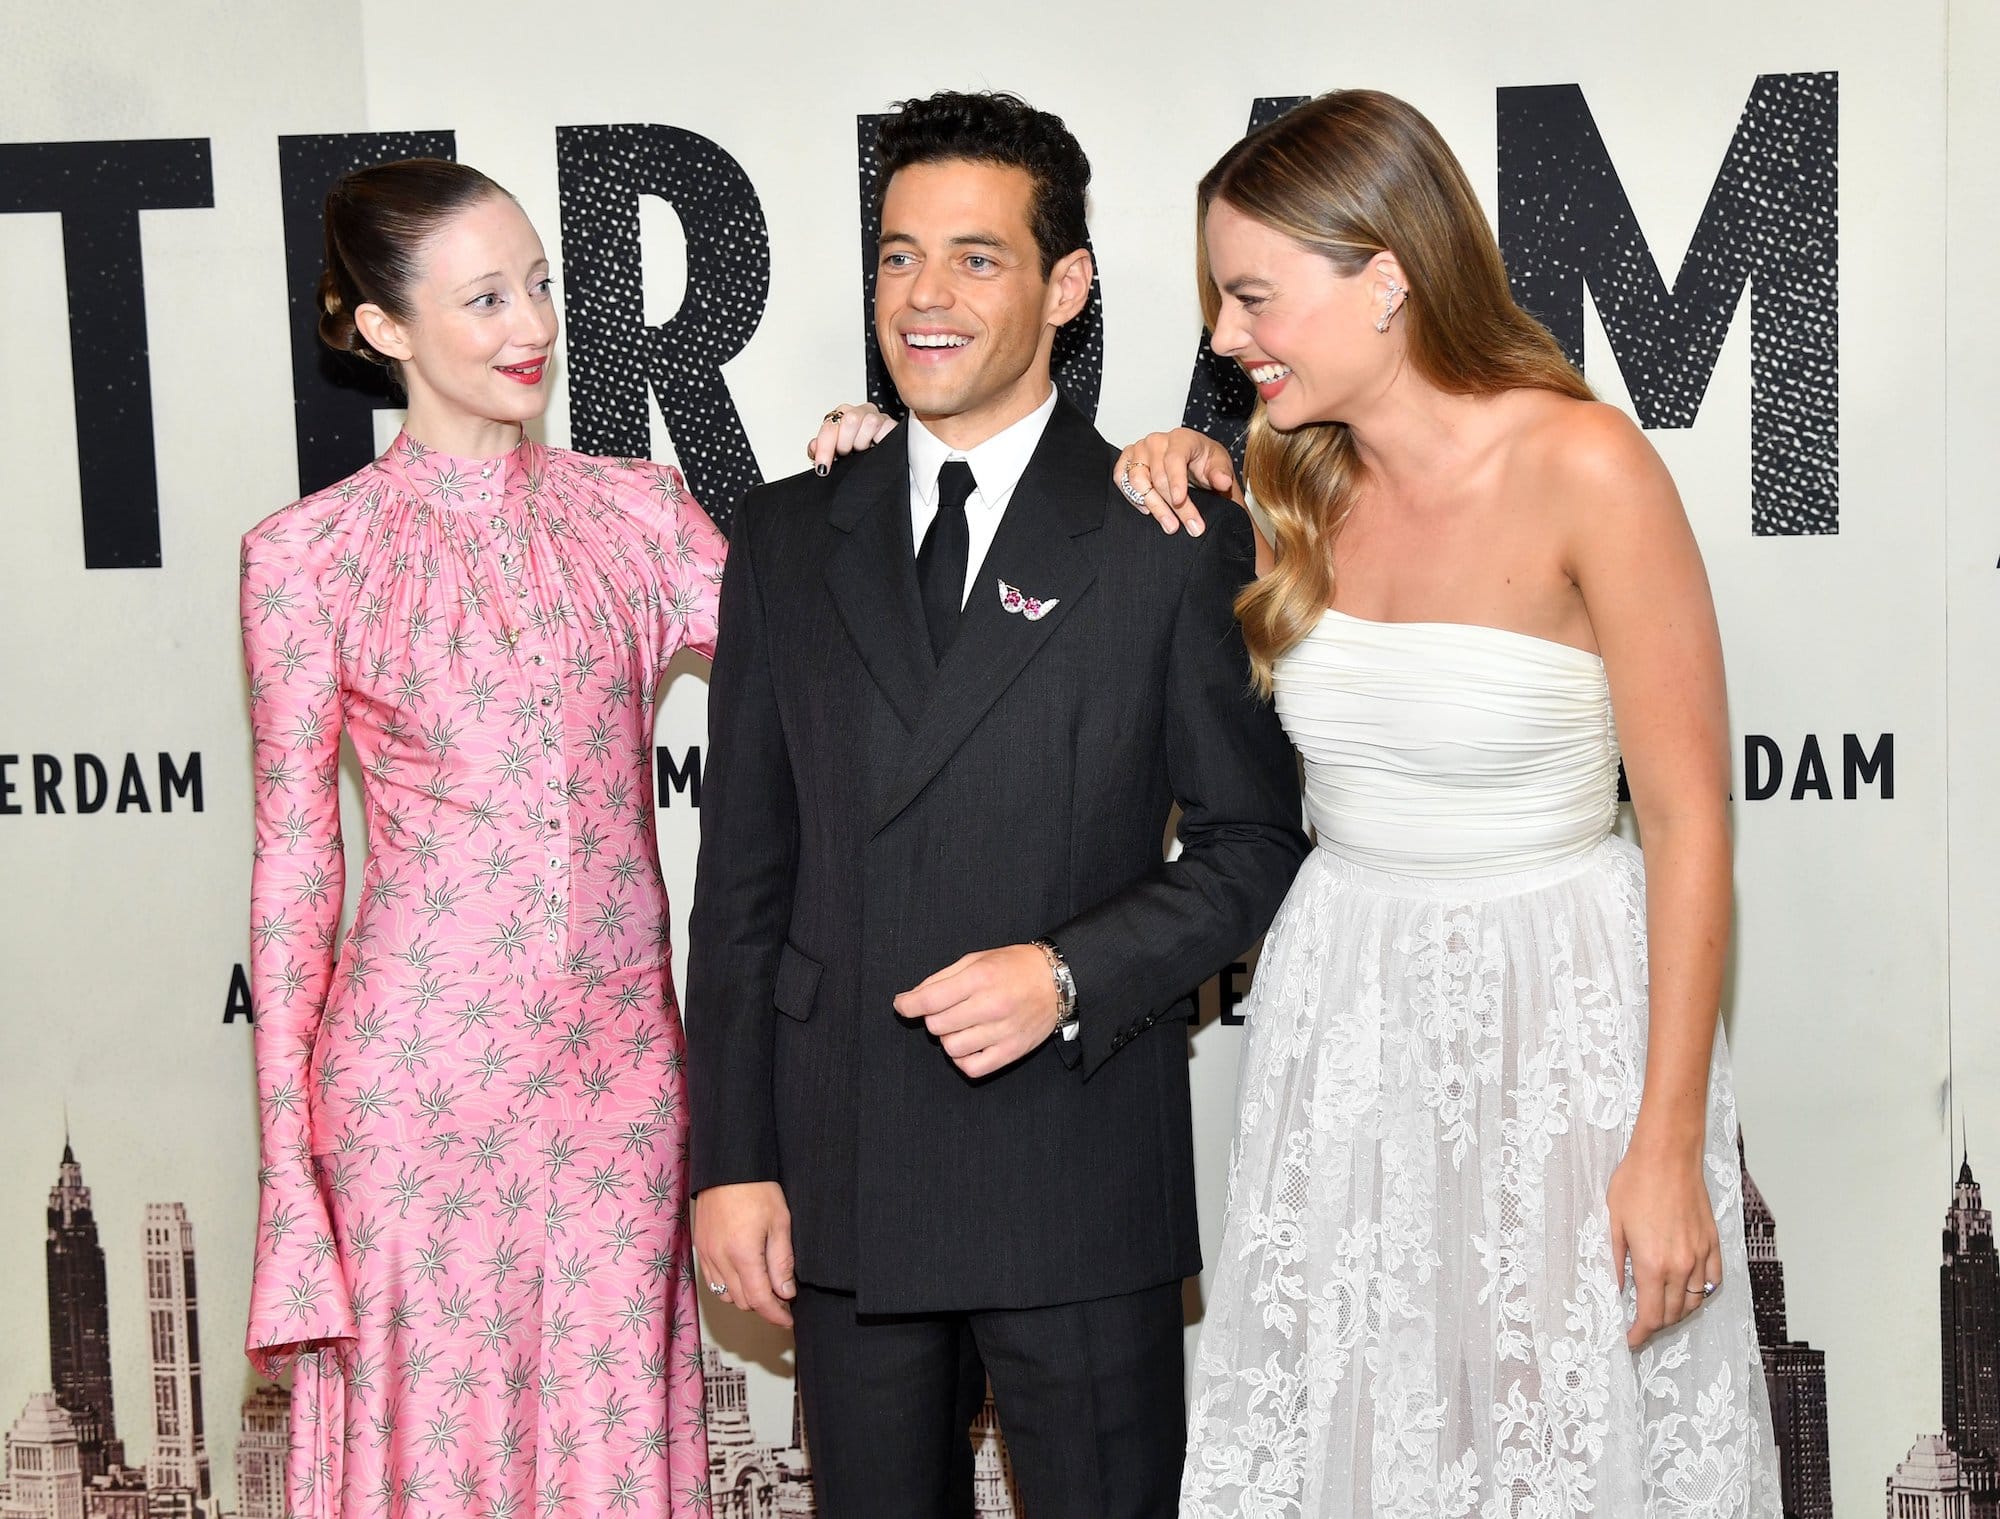 Andrea Riseborough had fun moment on the red carpet with Rami Malek and Margot Robbie.